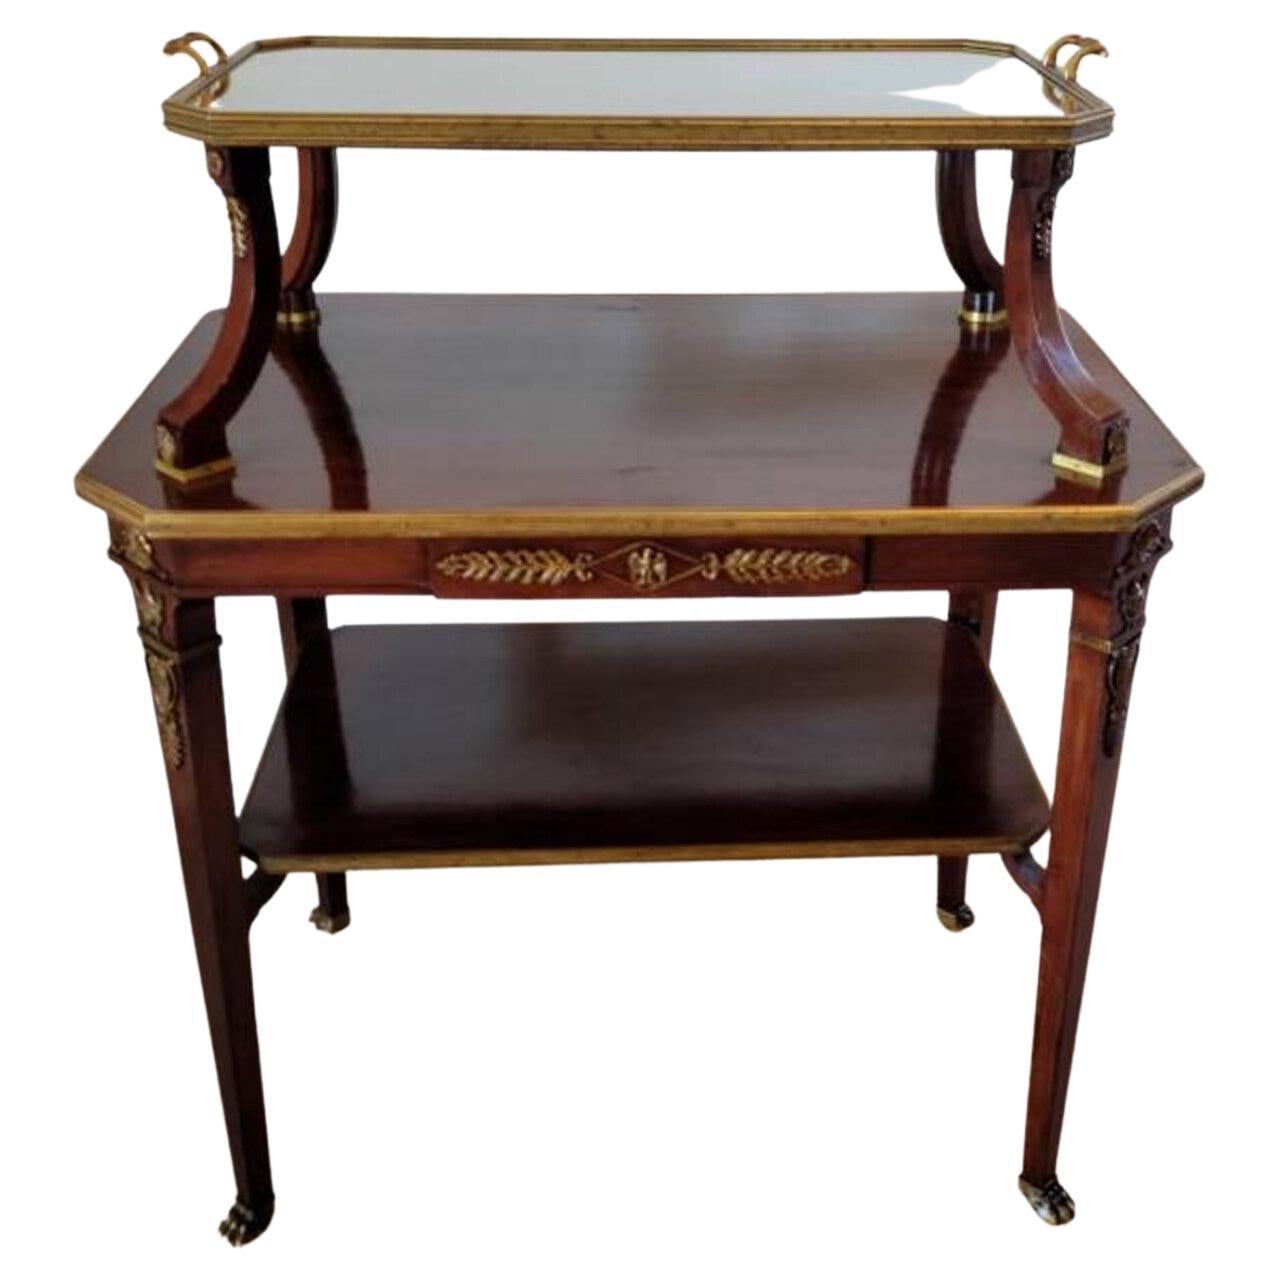 Krieger Signed Antique French Empire Tiered Tea Tray Table For Sale